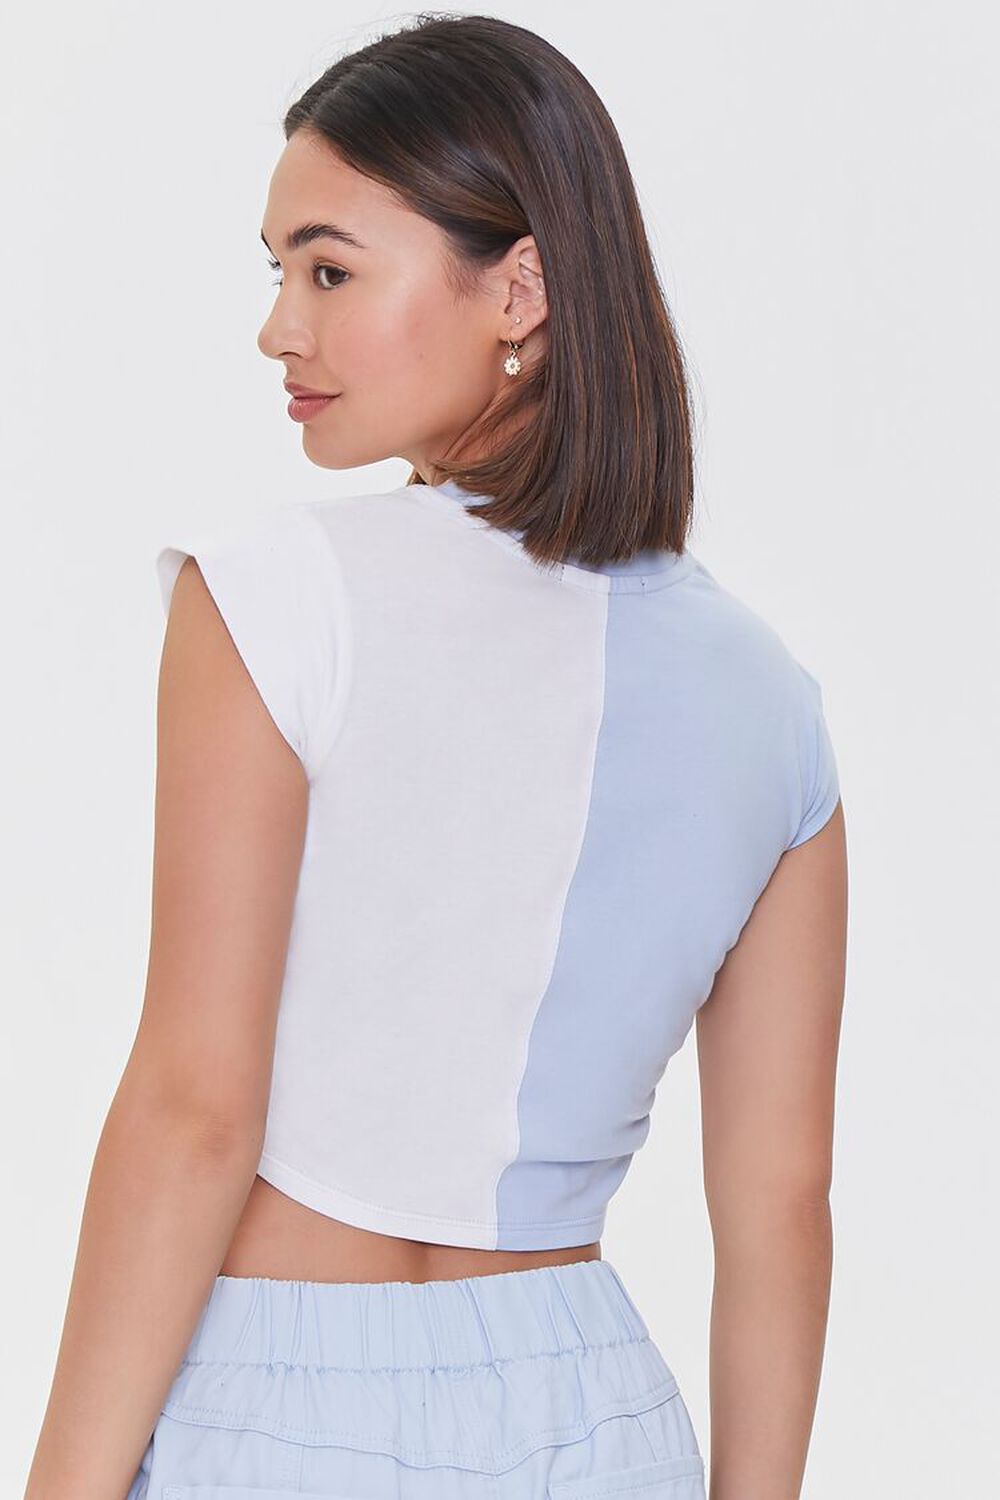 SKY BLUE/WHITE Colorblock Cropped Tee, image 3